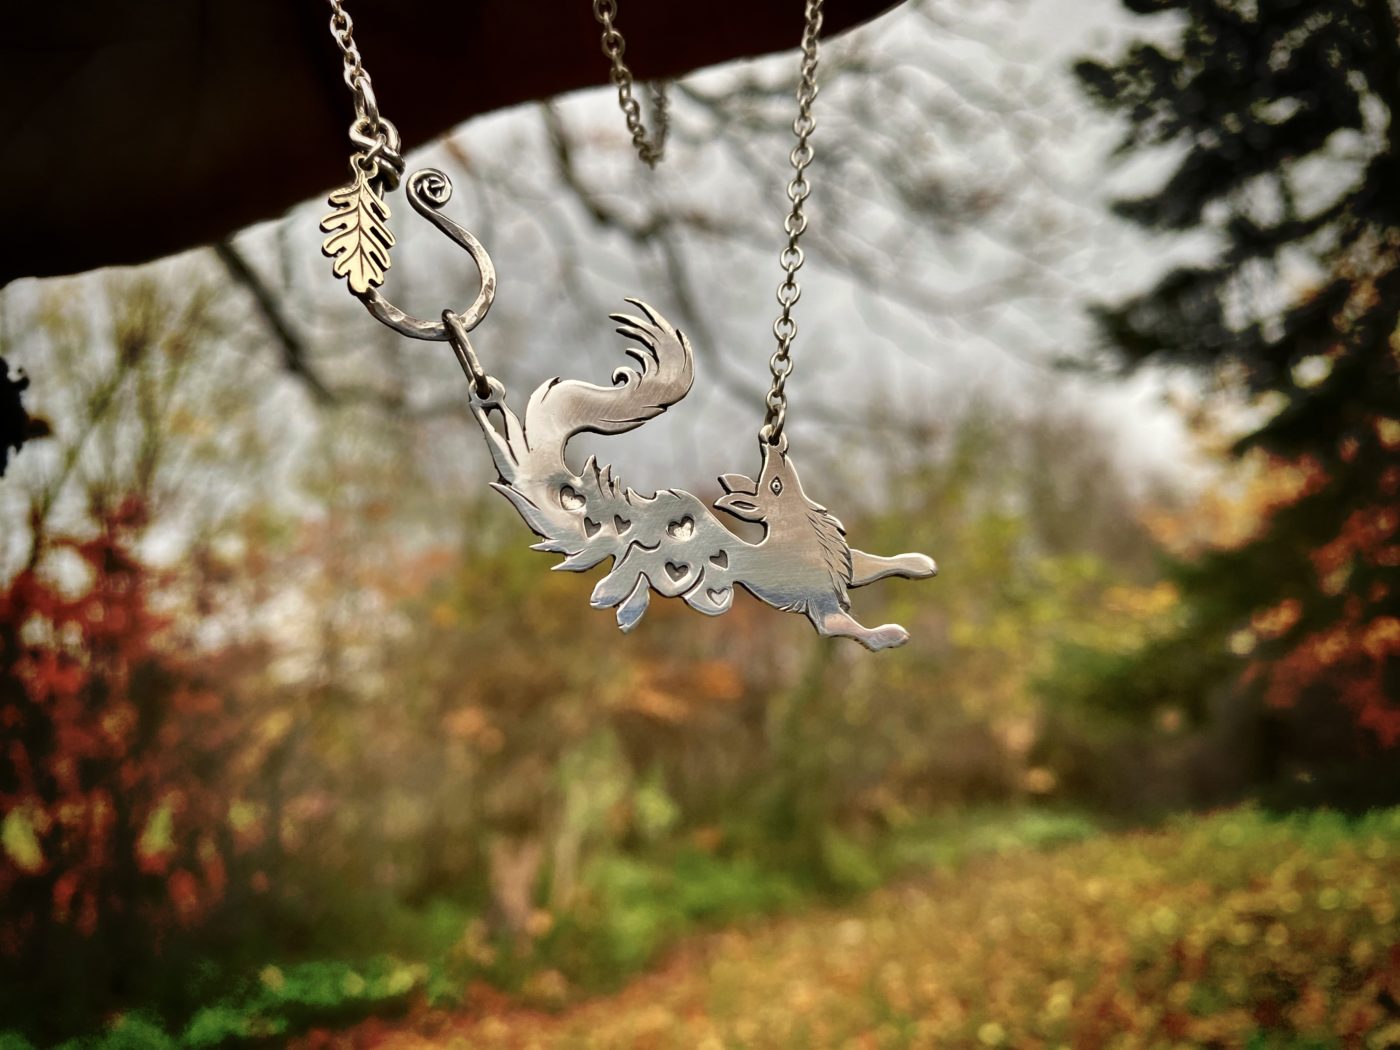 fox necklace dancing vixen hand crafted from recycled, upcycled repurposed ethical silver coins